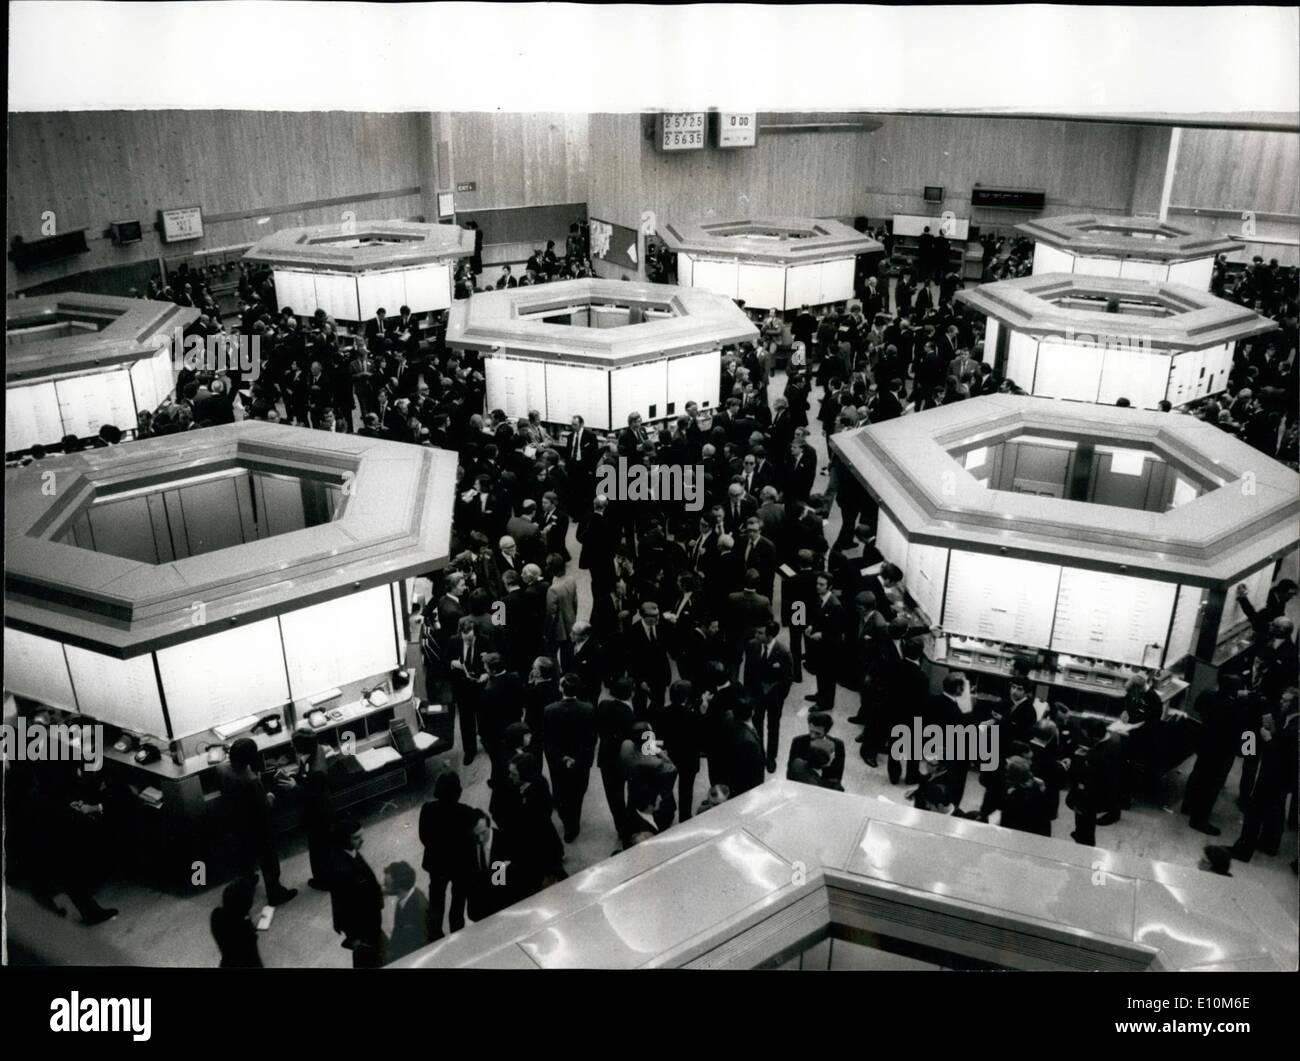 Jun. 06, 1973 - Opening of the new stock exchange in the city trading commences in the new floor: This morning the Stock Exchange moved into its new trading floor in the new building, the most modern trading center in the world with its array of technology, including two way radio for members and jobbers carrying pocket ''bleeps'' to keep in touch with their offices. The new building is in Threaoneedle Street in the city of London. Stock Photo